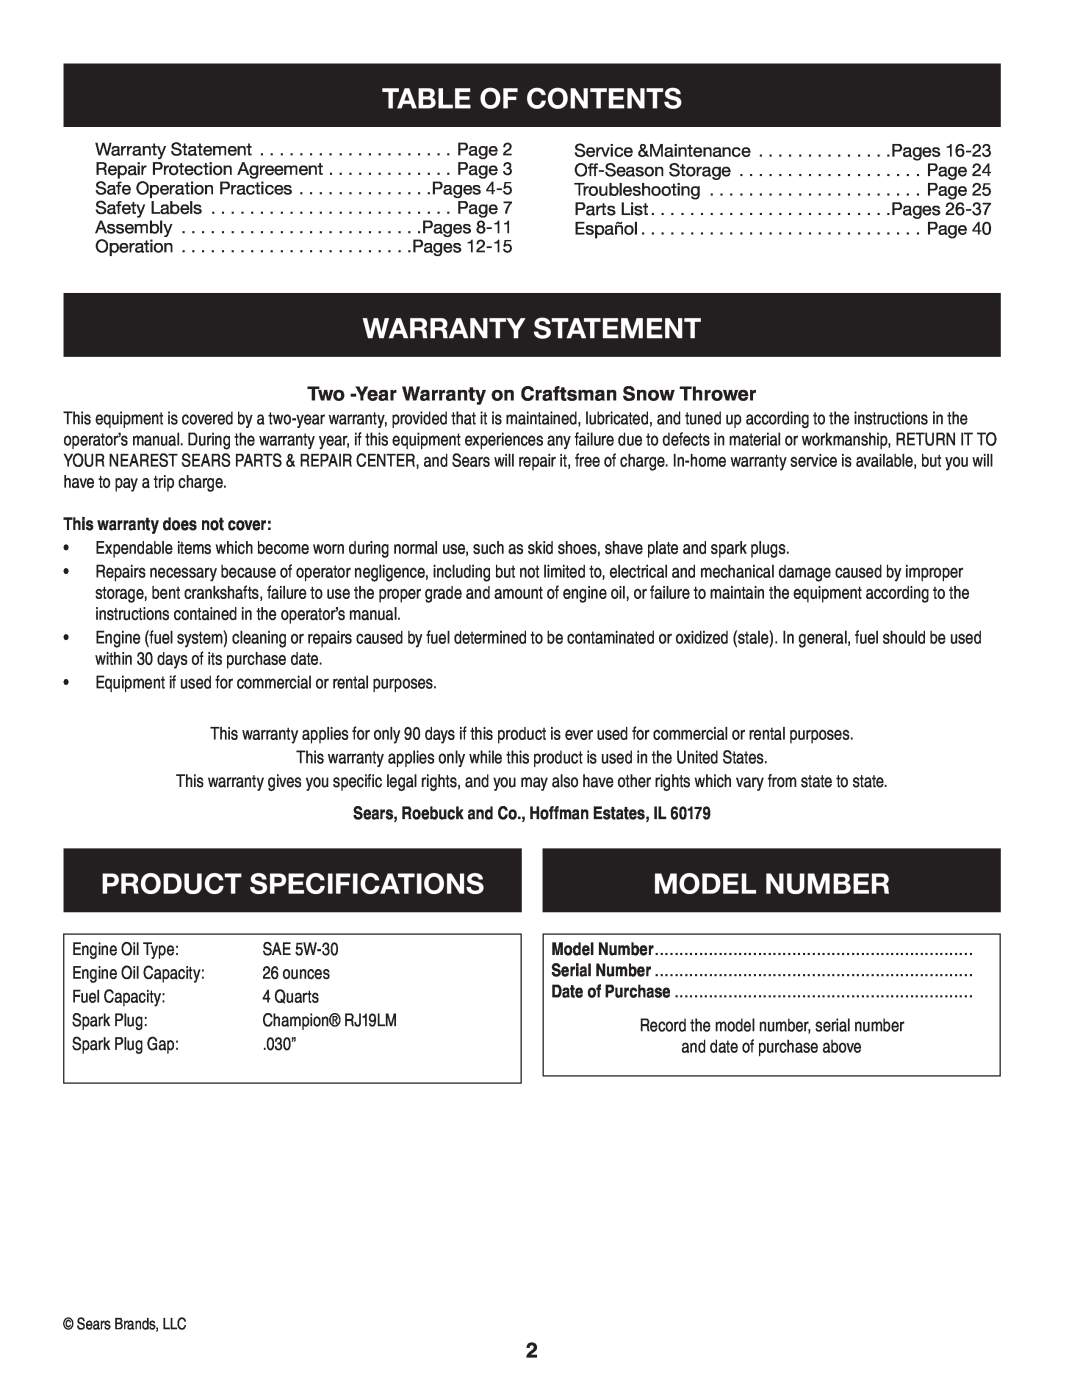 Craftsman 247.8819 operating instructions Table Of Contents, Warranty Statement, Product Specifications, Model Number 